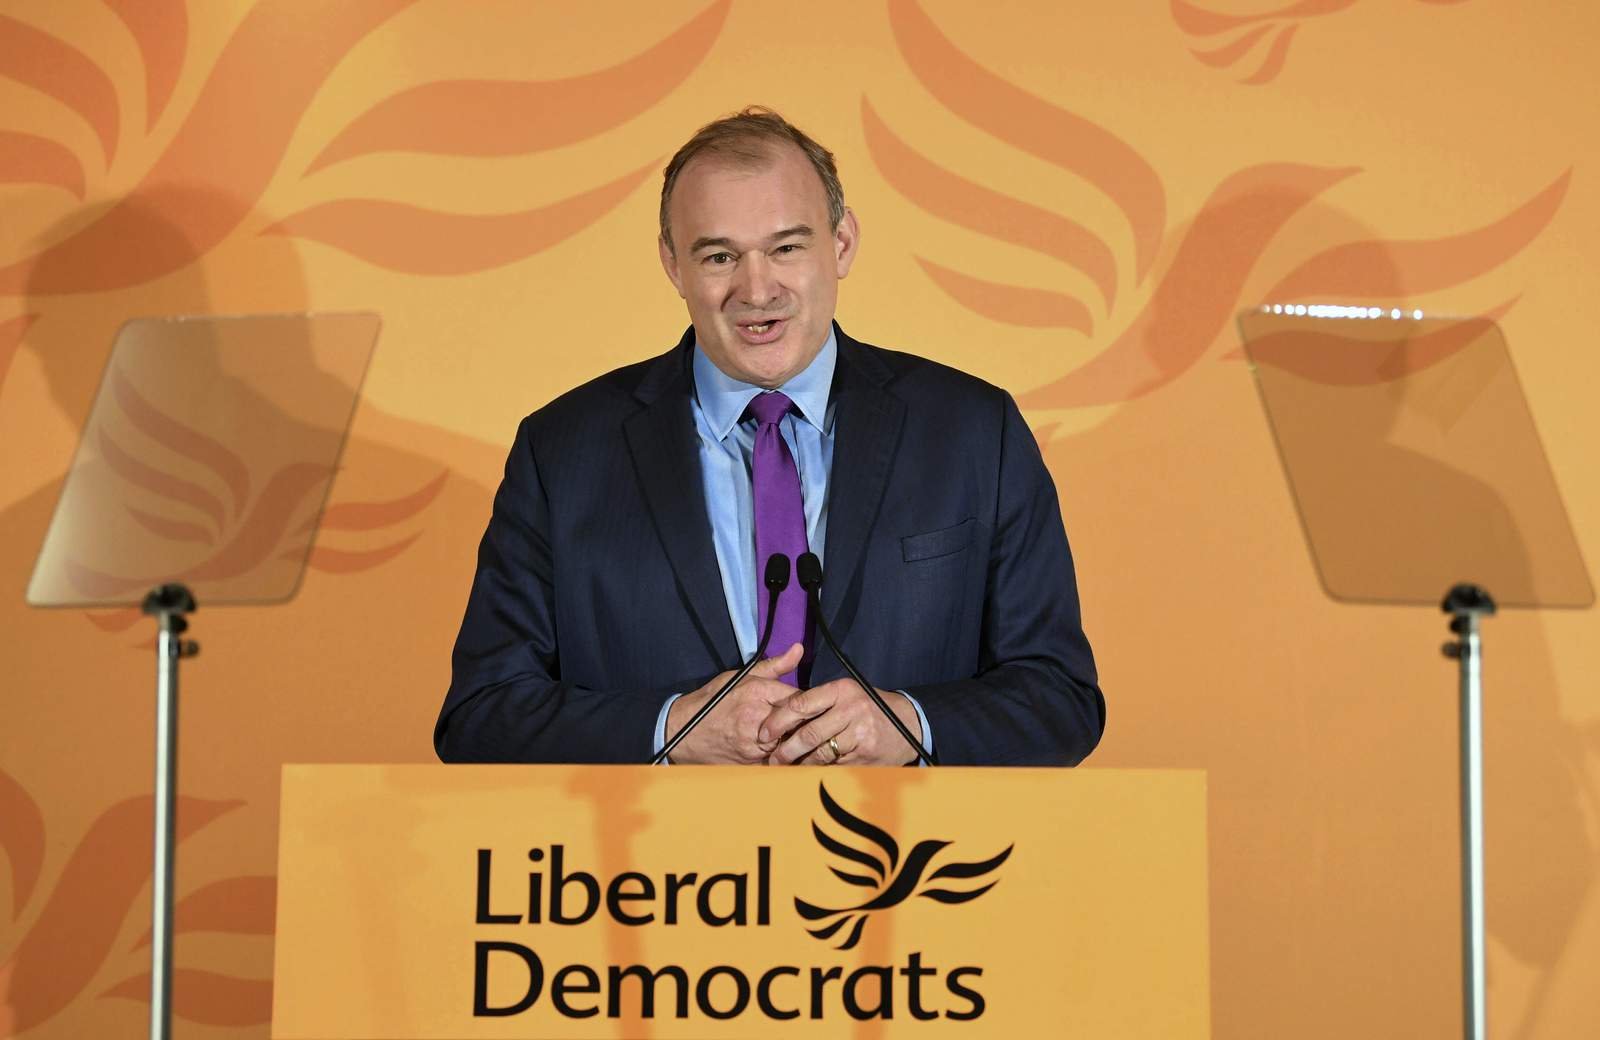 UK's Liberal Democrat party elects Ed Davey as new leader